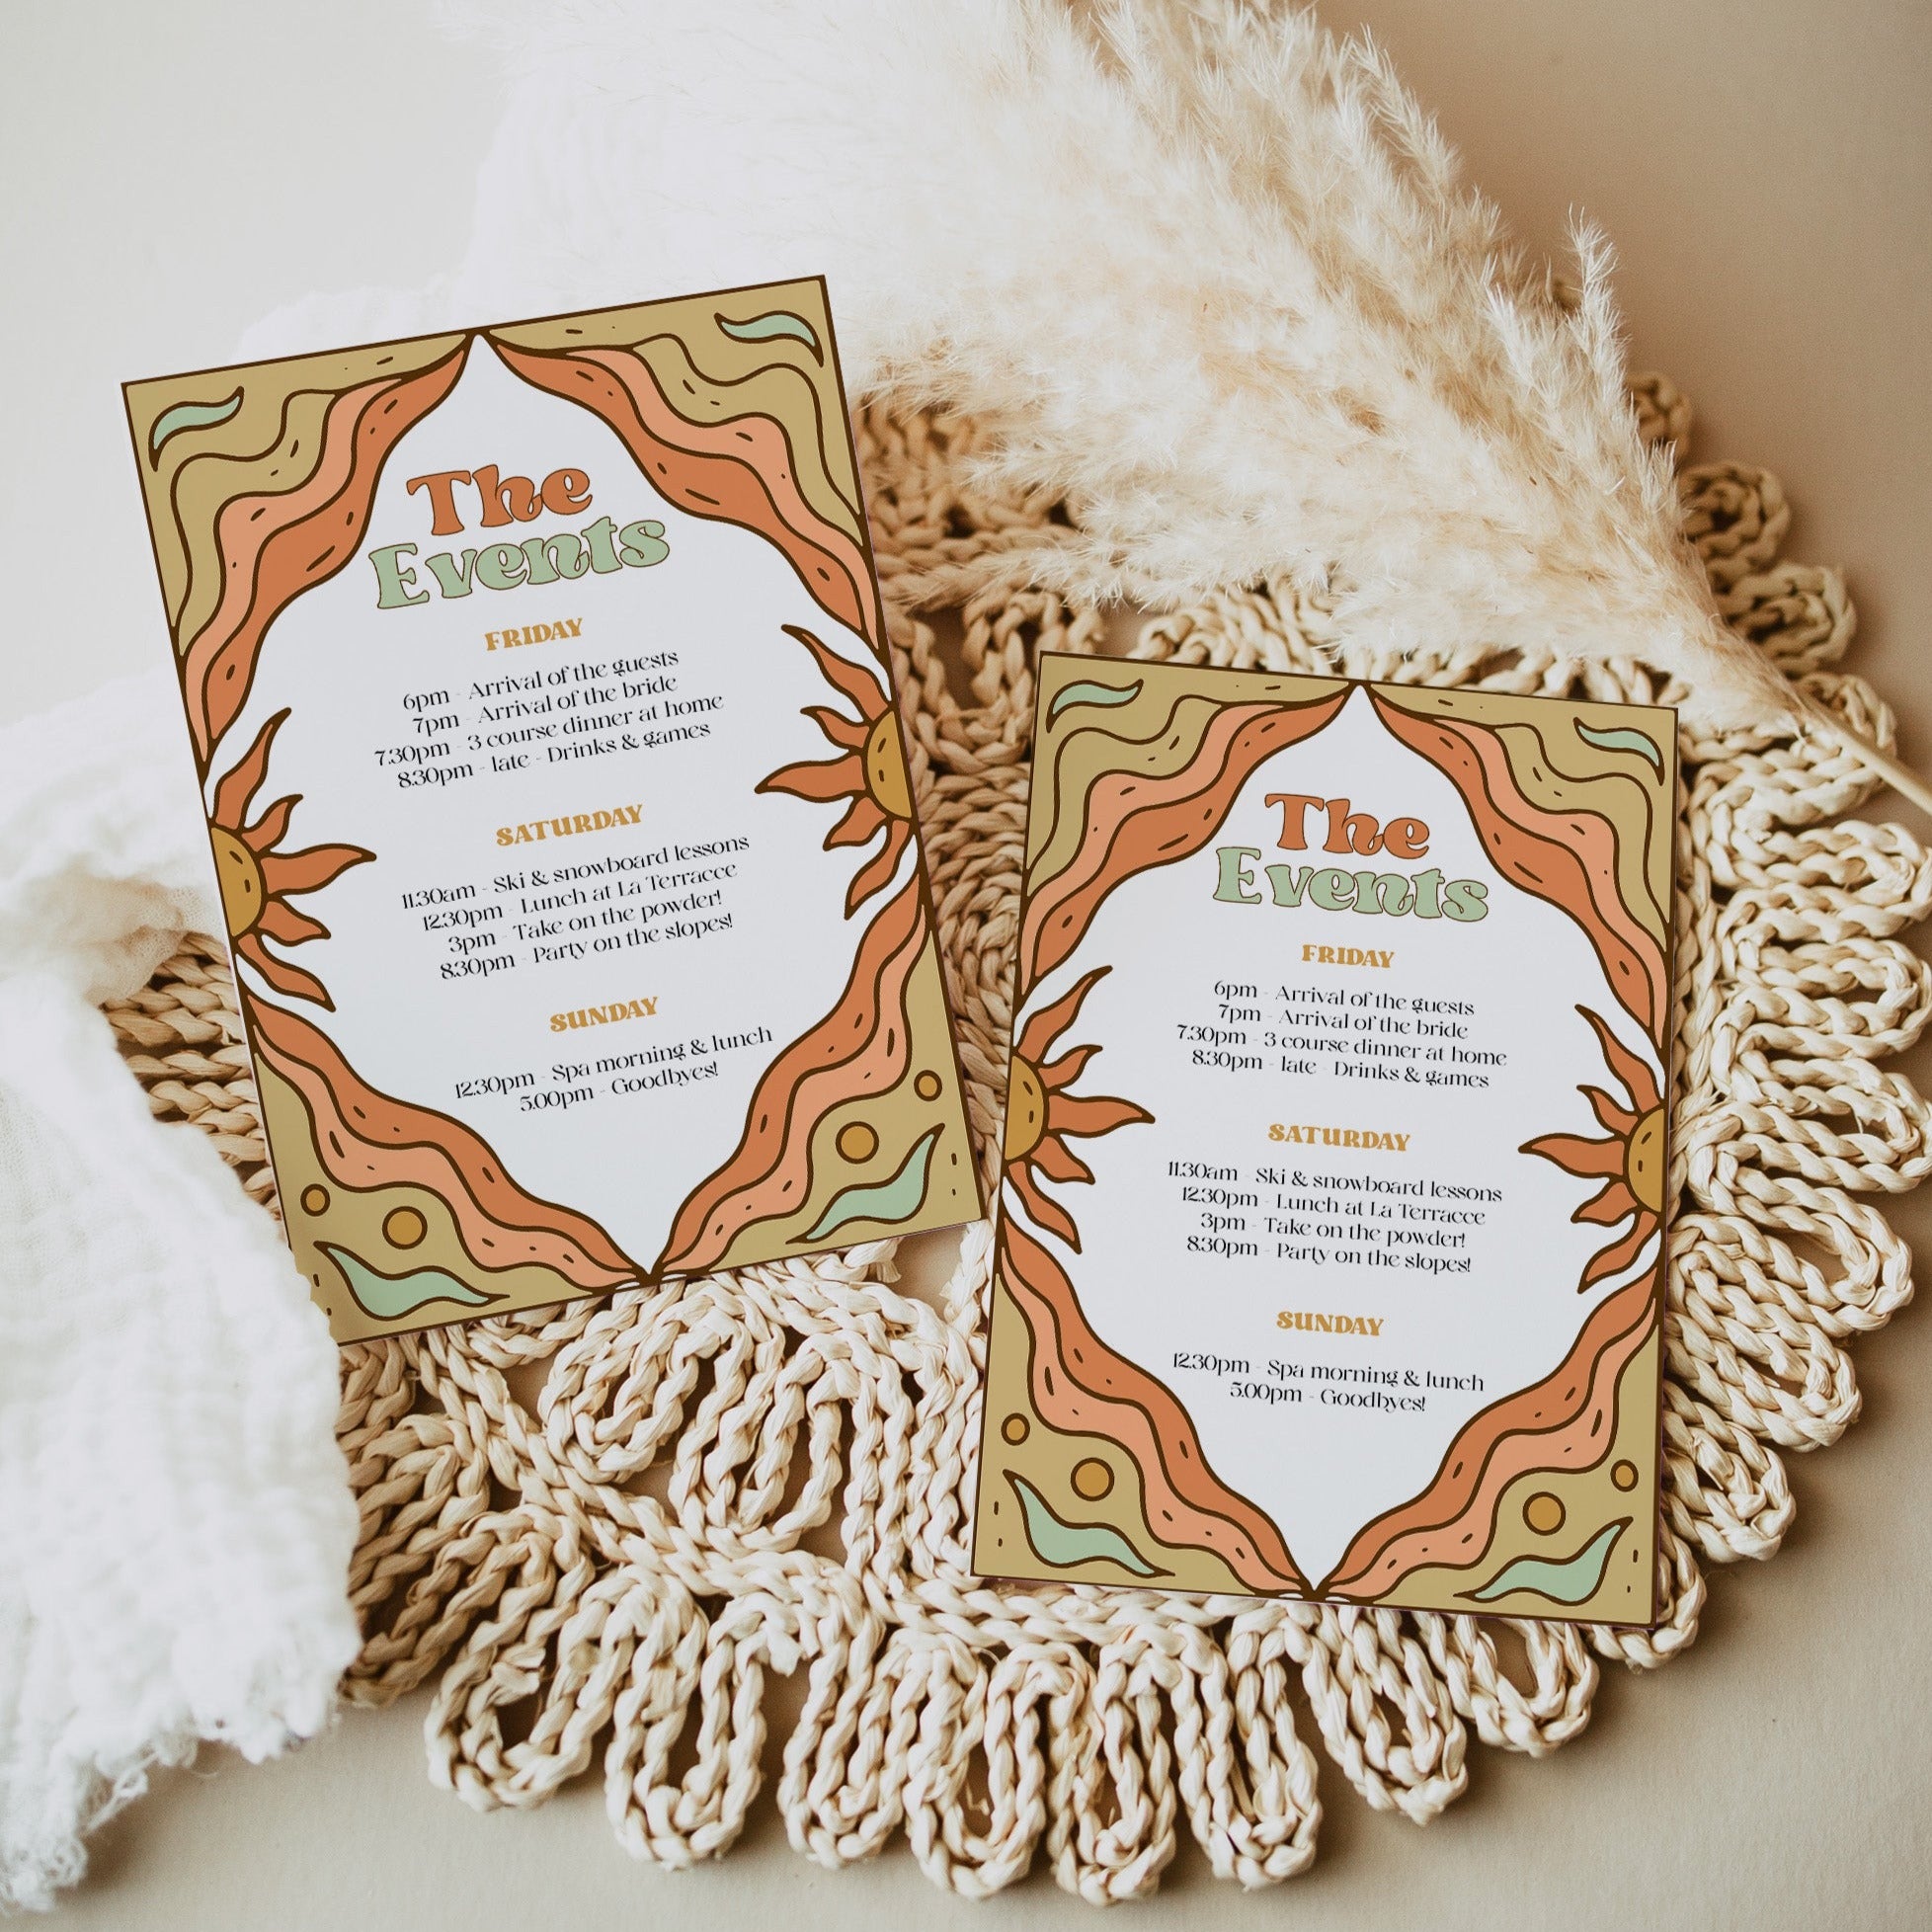 60s Gypsy Boho-inspired editable bridal shower itinerary is the perfect way to add a touch of free-spirited charm to your special day